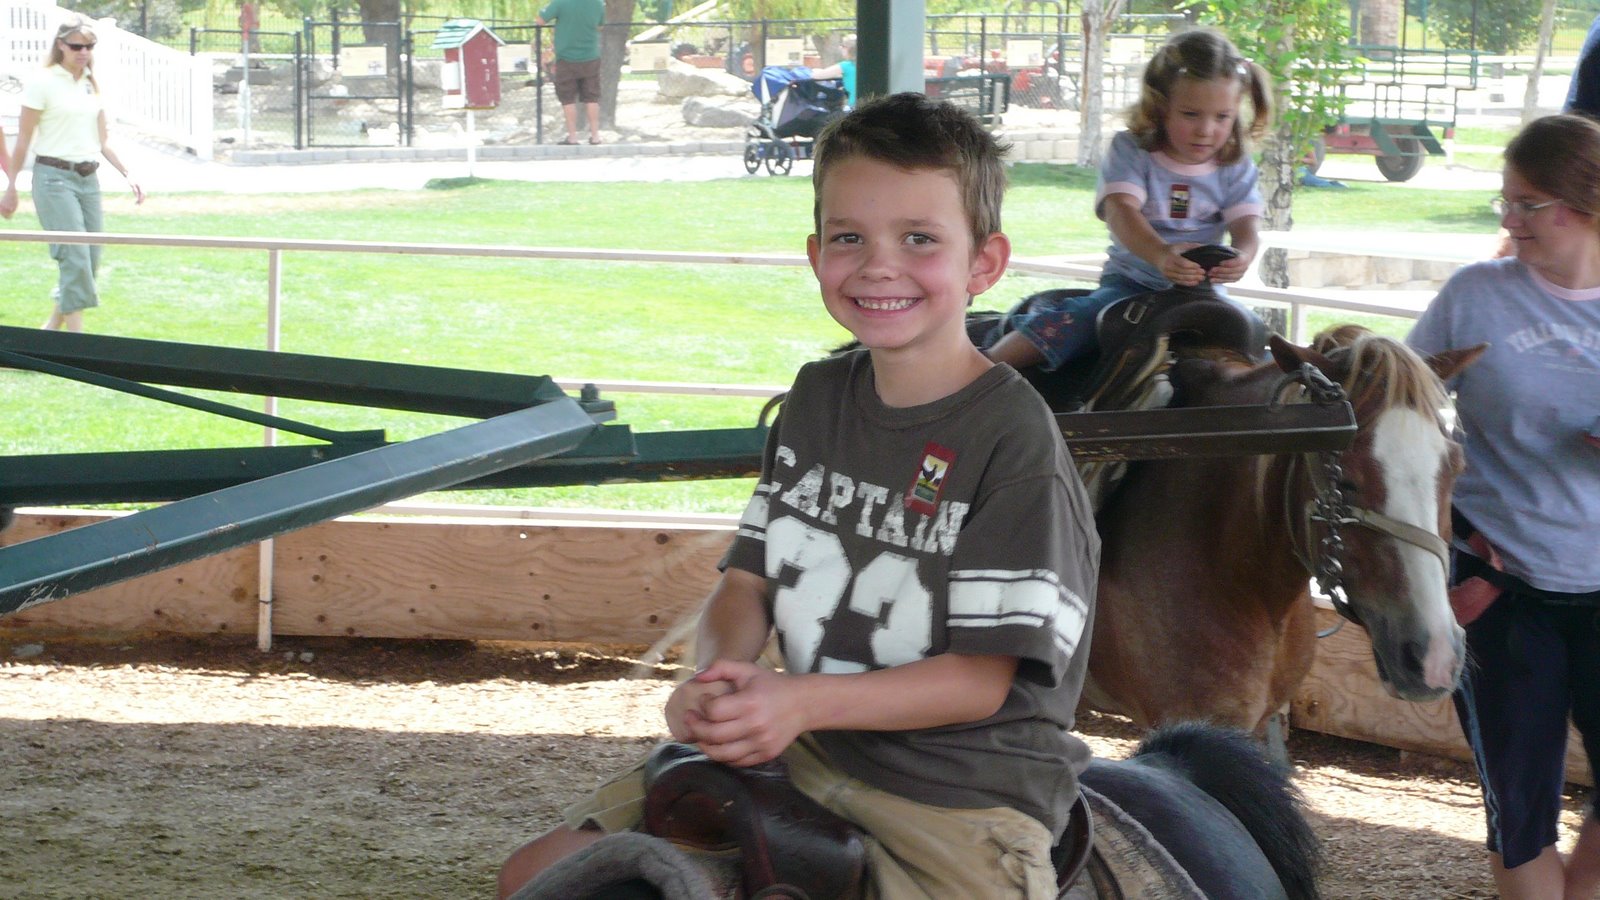 Josh riding a horse in Farm Country